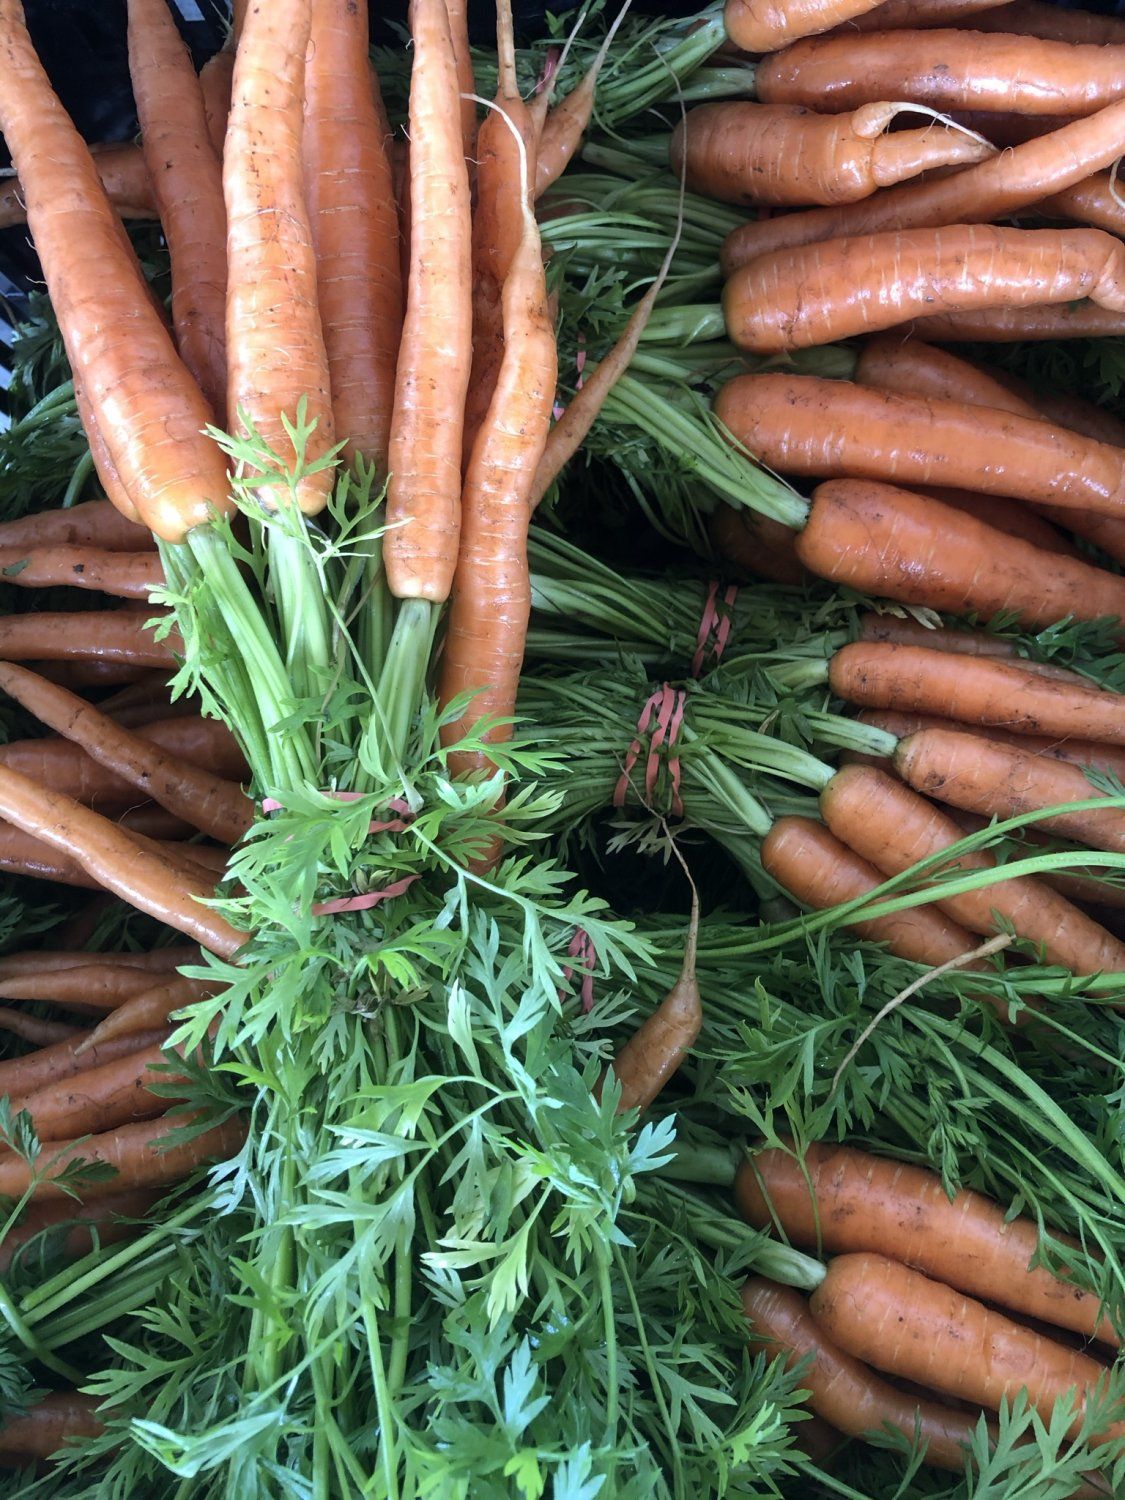 Surprise! - Carrots, zucchini, cauliflower and more available